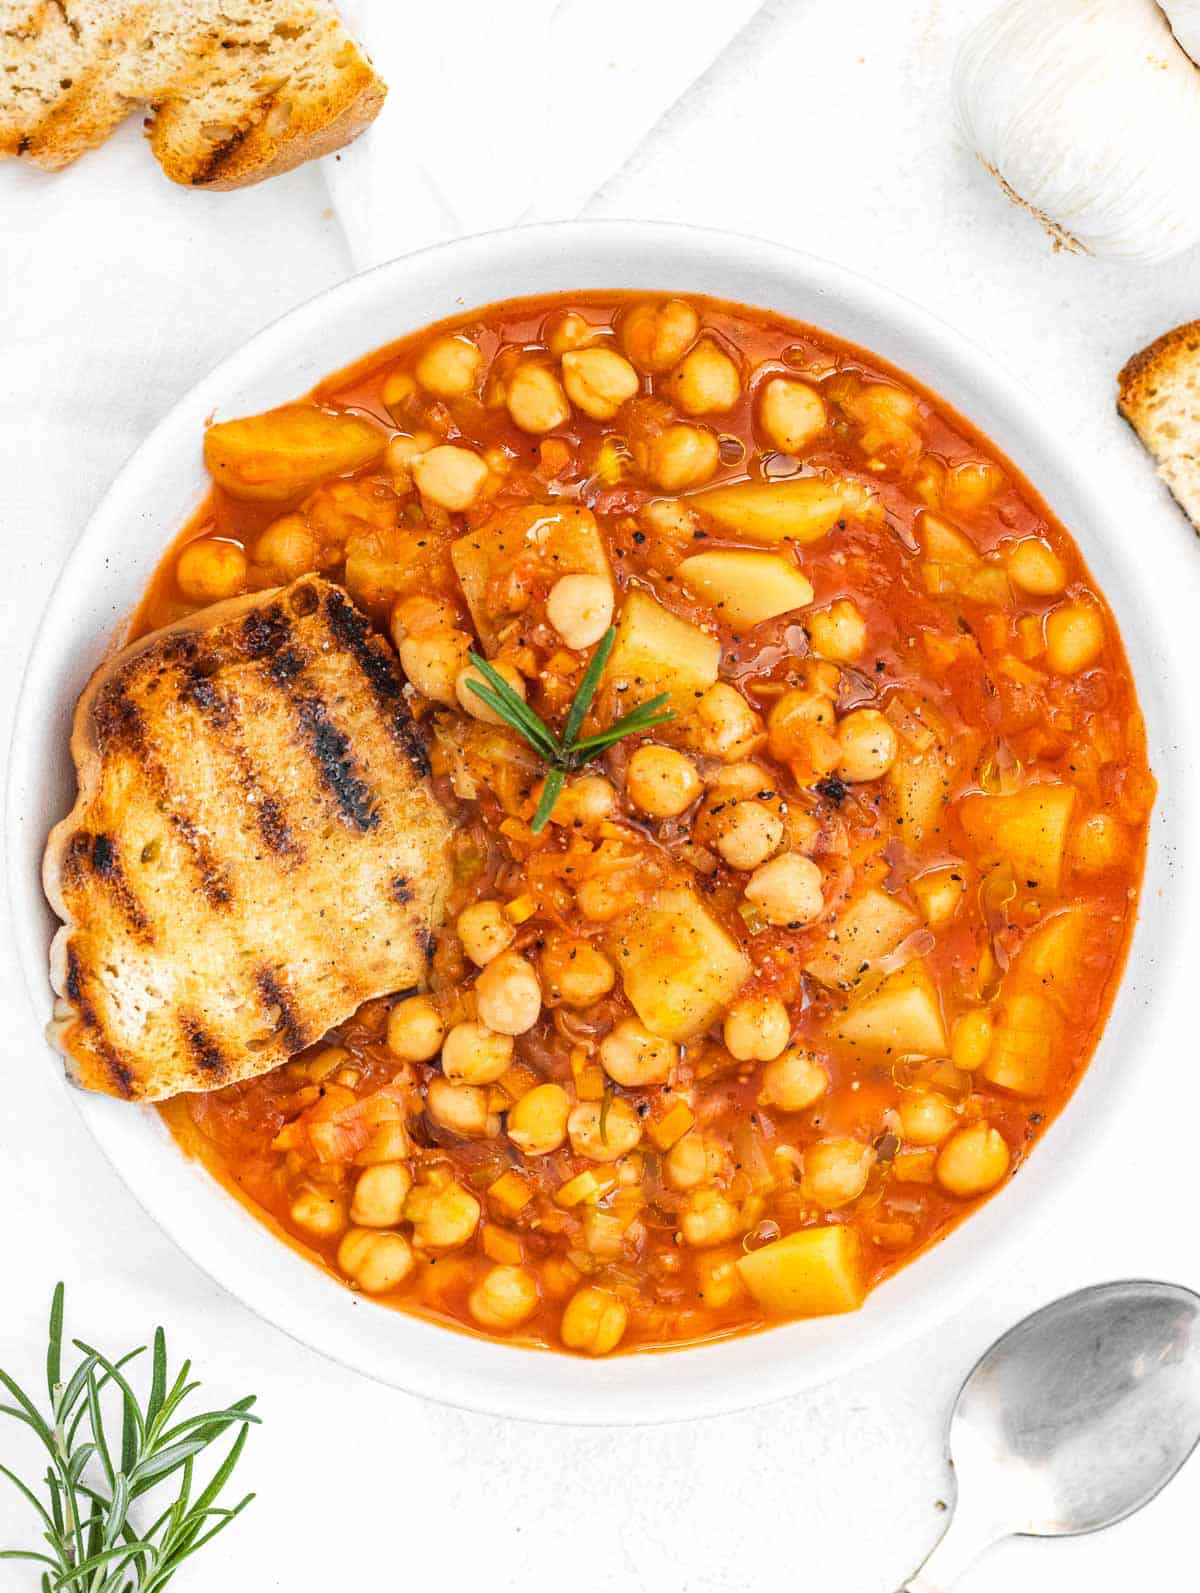 Chickpea soup in a white bowl with bread